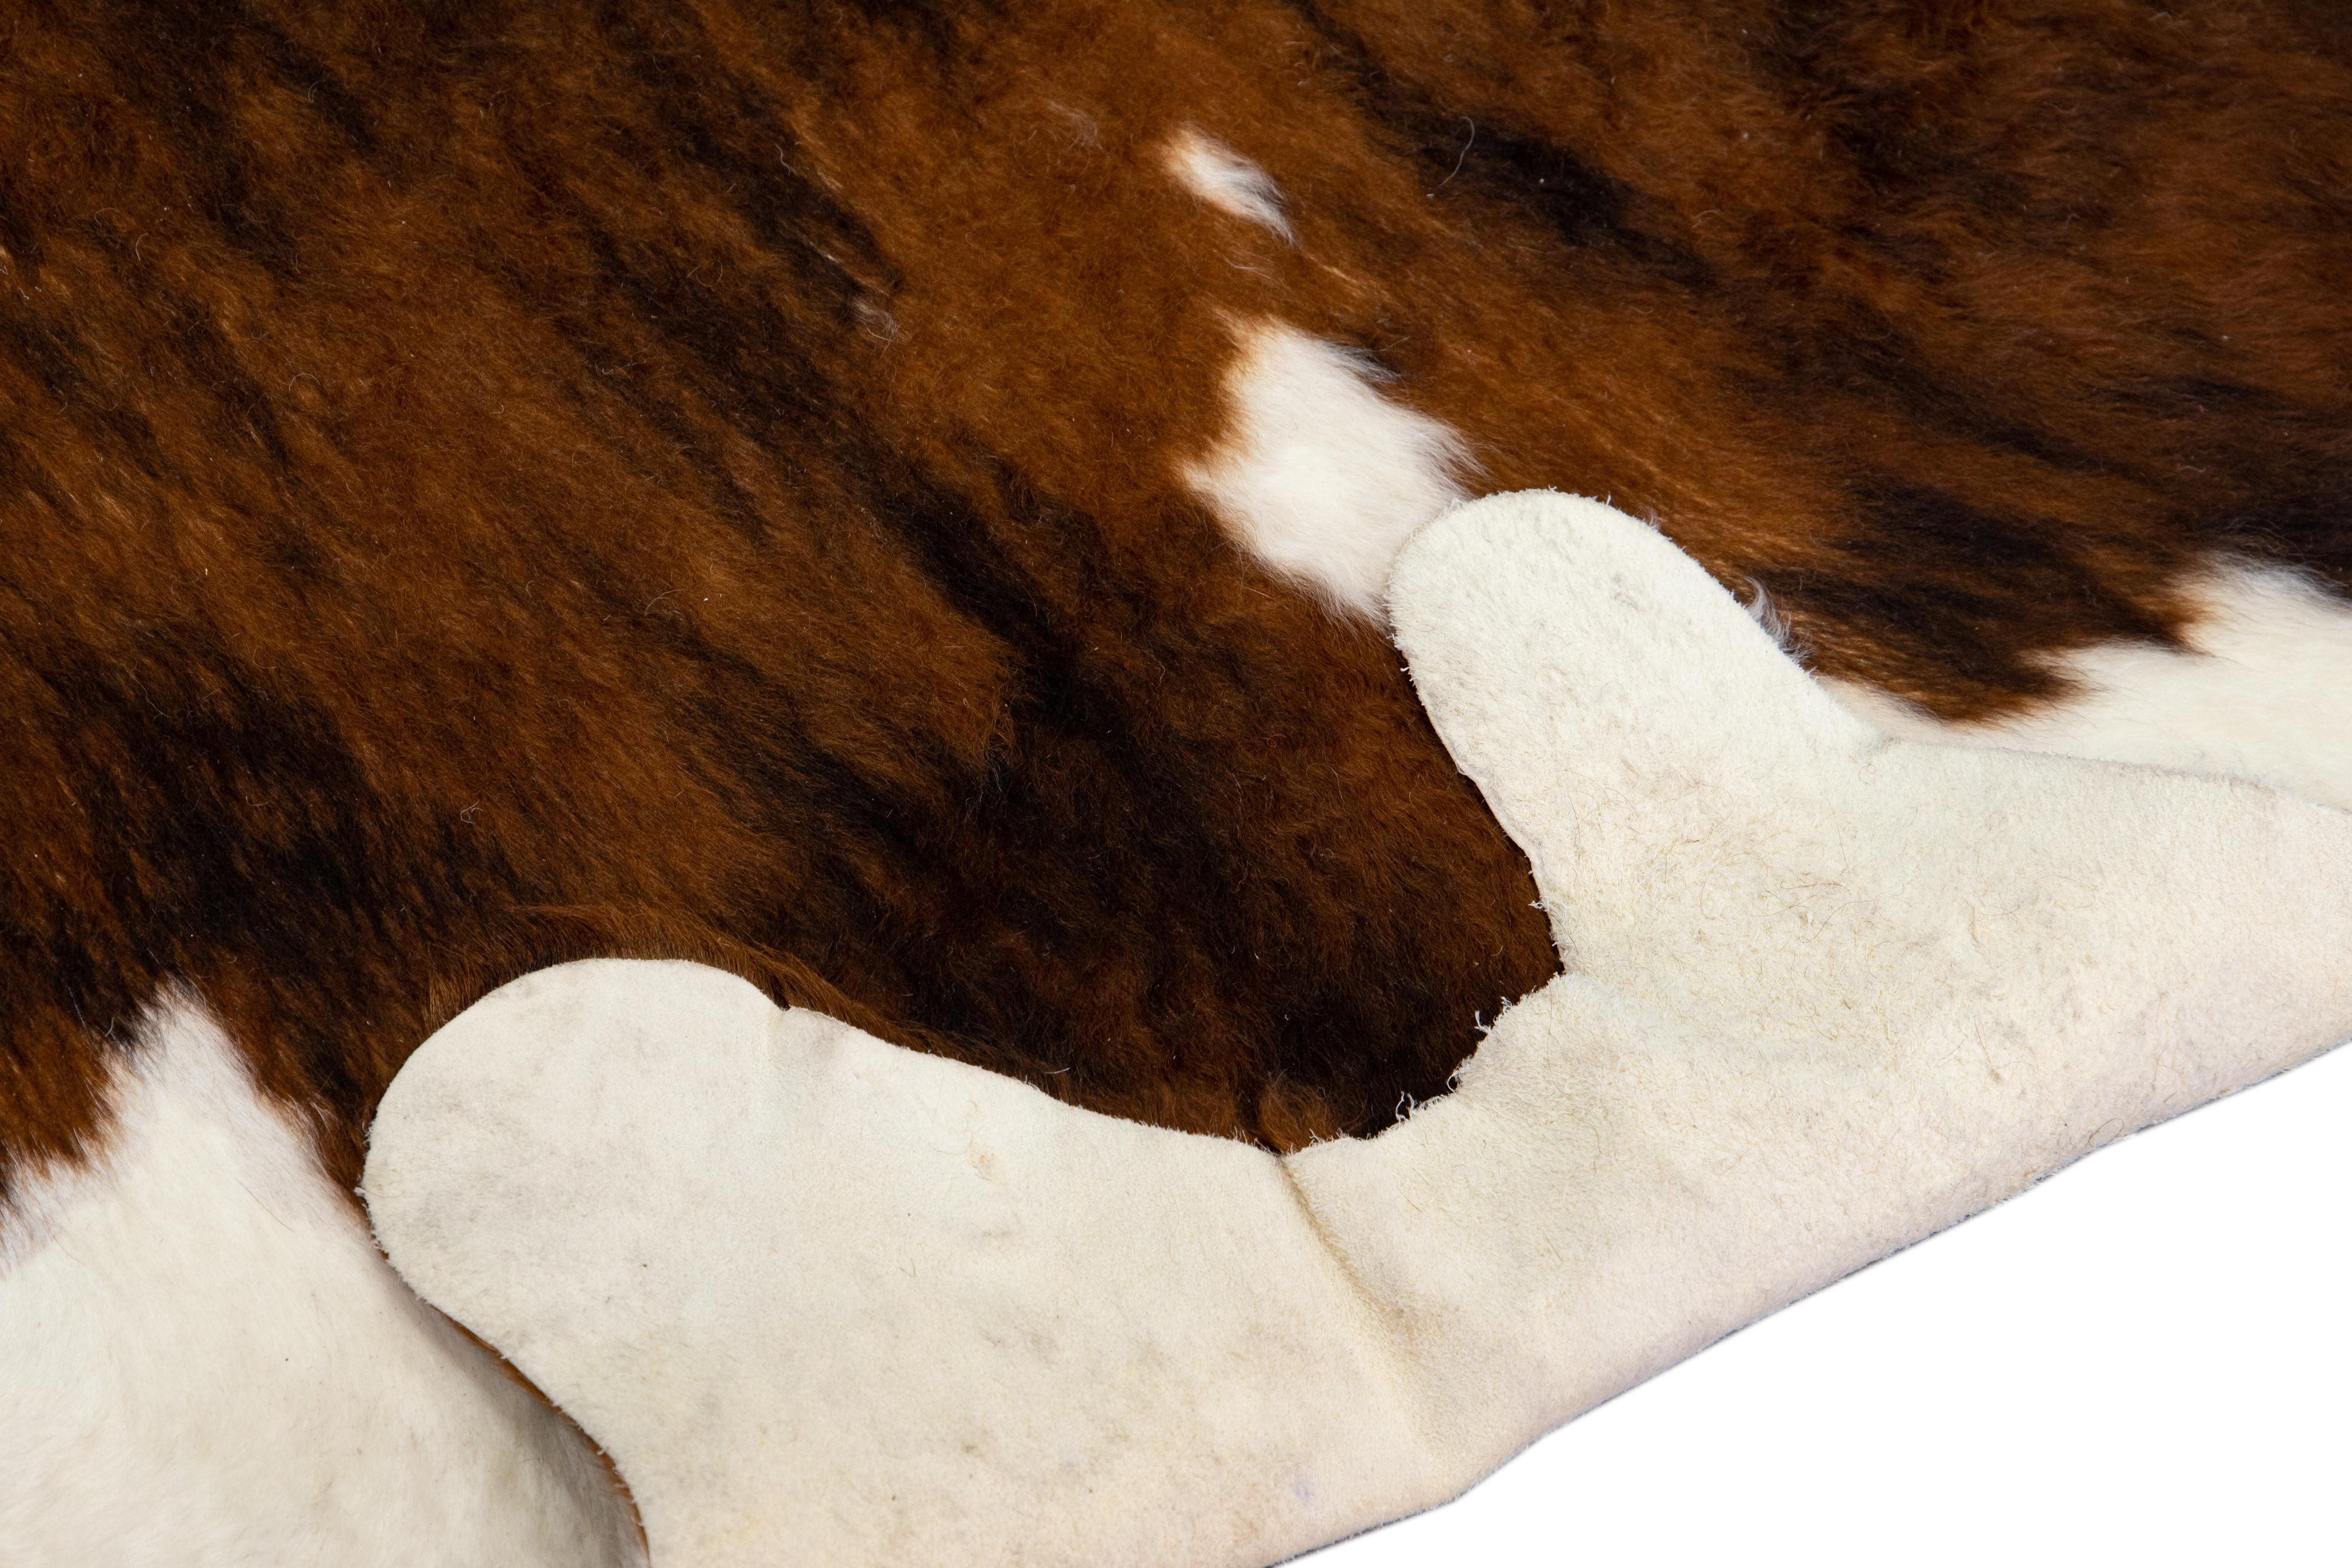 This beautiful modern Cowhide rug adds a rustic charm to any space in your house and can be used as a floor carpet, a couch throw, or even a wall decor. Cowhides are known for their soft feel underfoot. Add a touch of cozy to any room with this